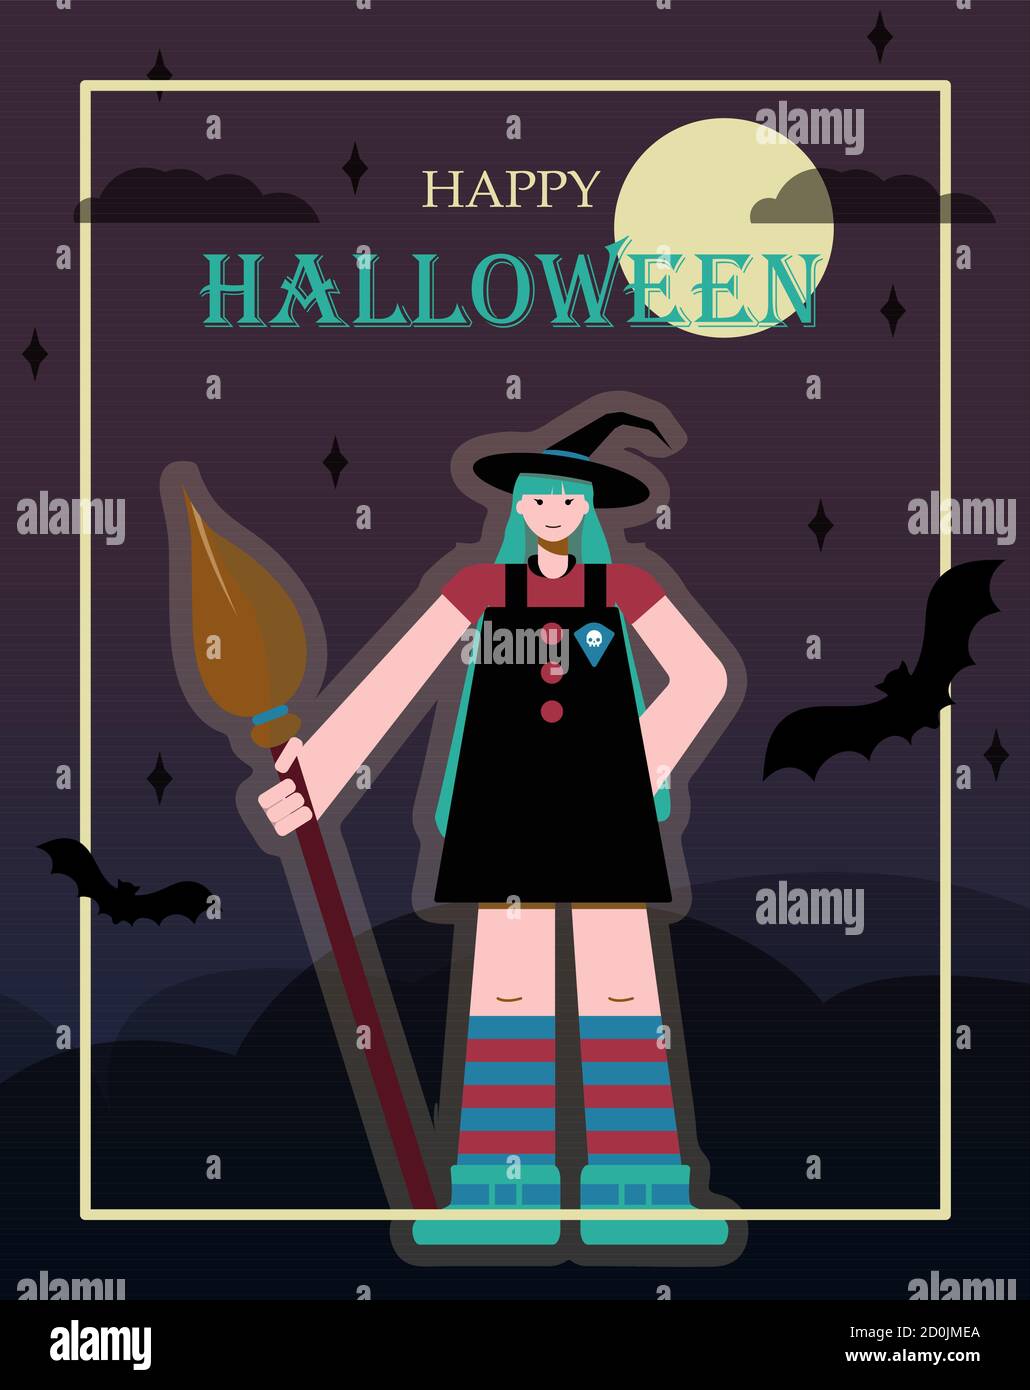 Cartoon witch with huge legs and arms. Cute vector drawing for all saints day. Flat design greeting card for Halloween with bats, a witch and a broom. An image for a flyer, ad, invitation, or website. A young witch in a hat, with green hair and striped stockings. Stock Vector